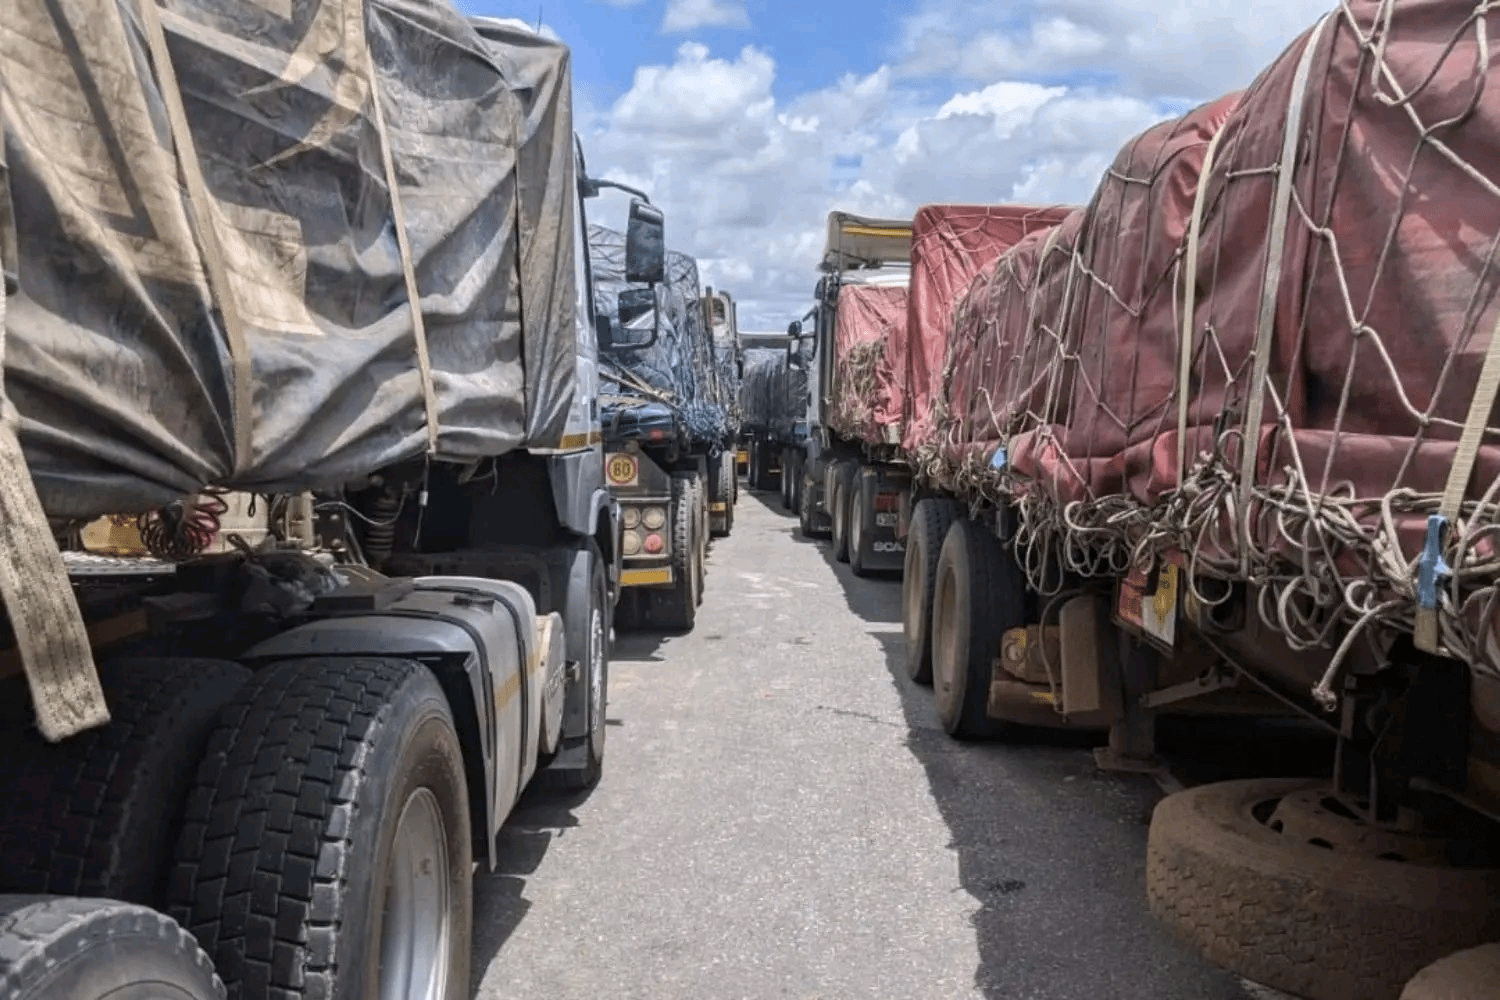 Road closures expected as truckers protest over foreign nationals